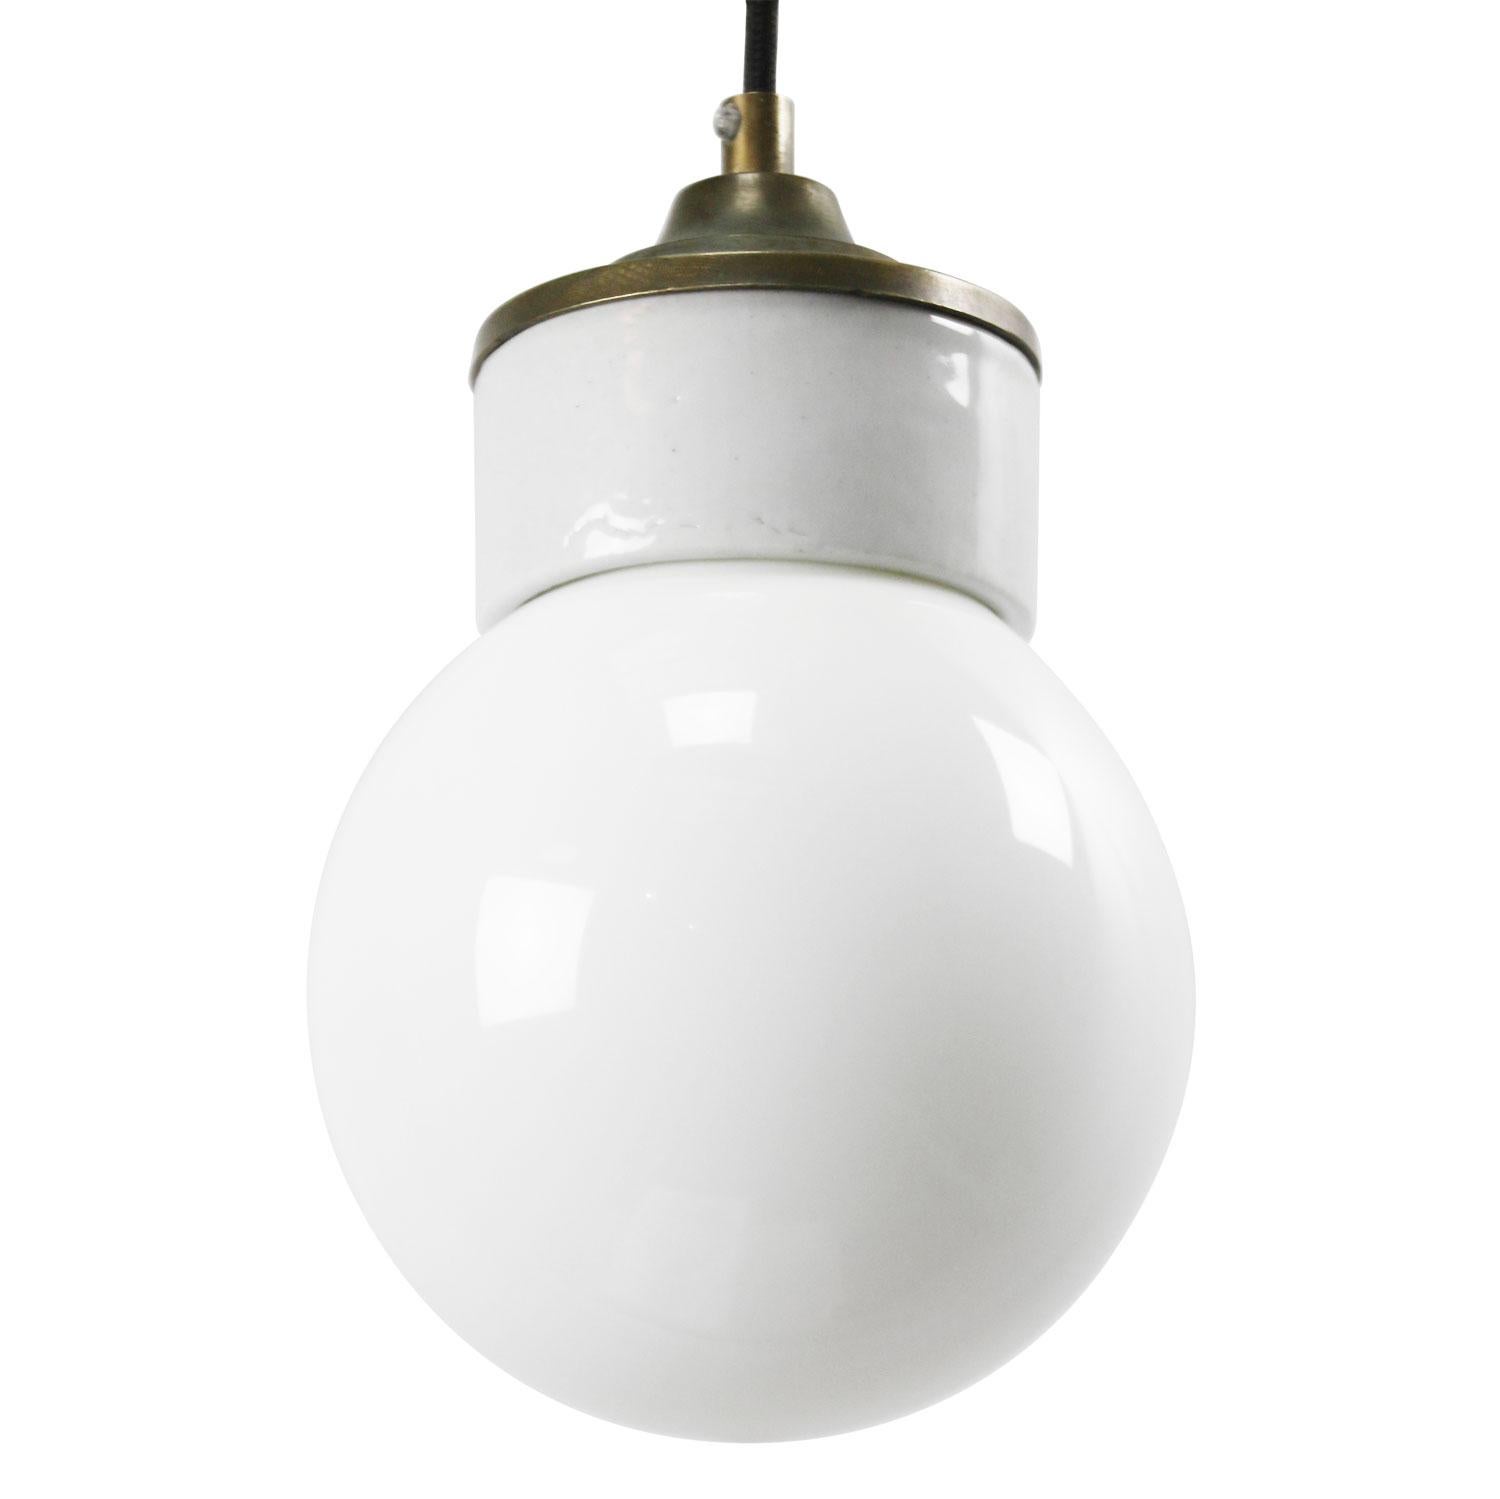 White Porcelain White Opaline Glass Vintage Industrial Brass Pendant Lights In Excellent Condition For Sale In Amsterdam, NL